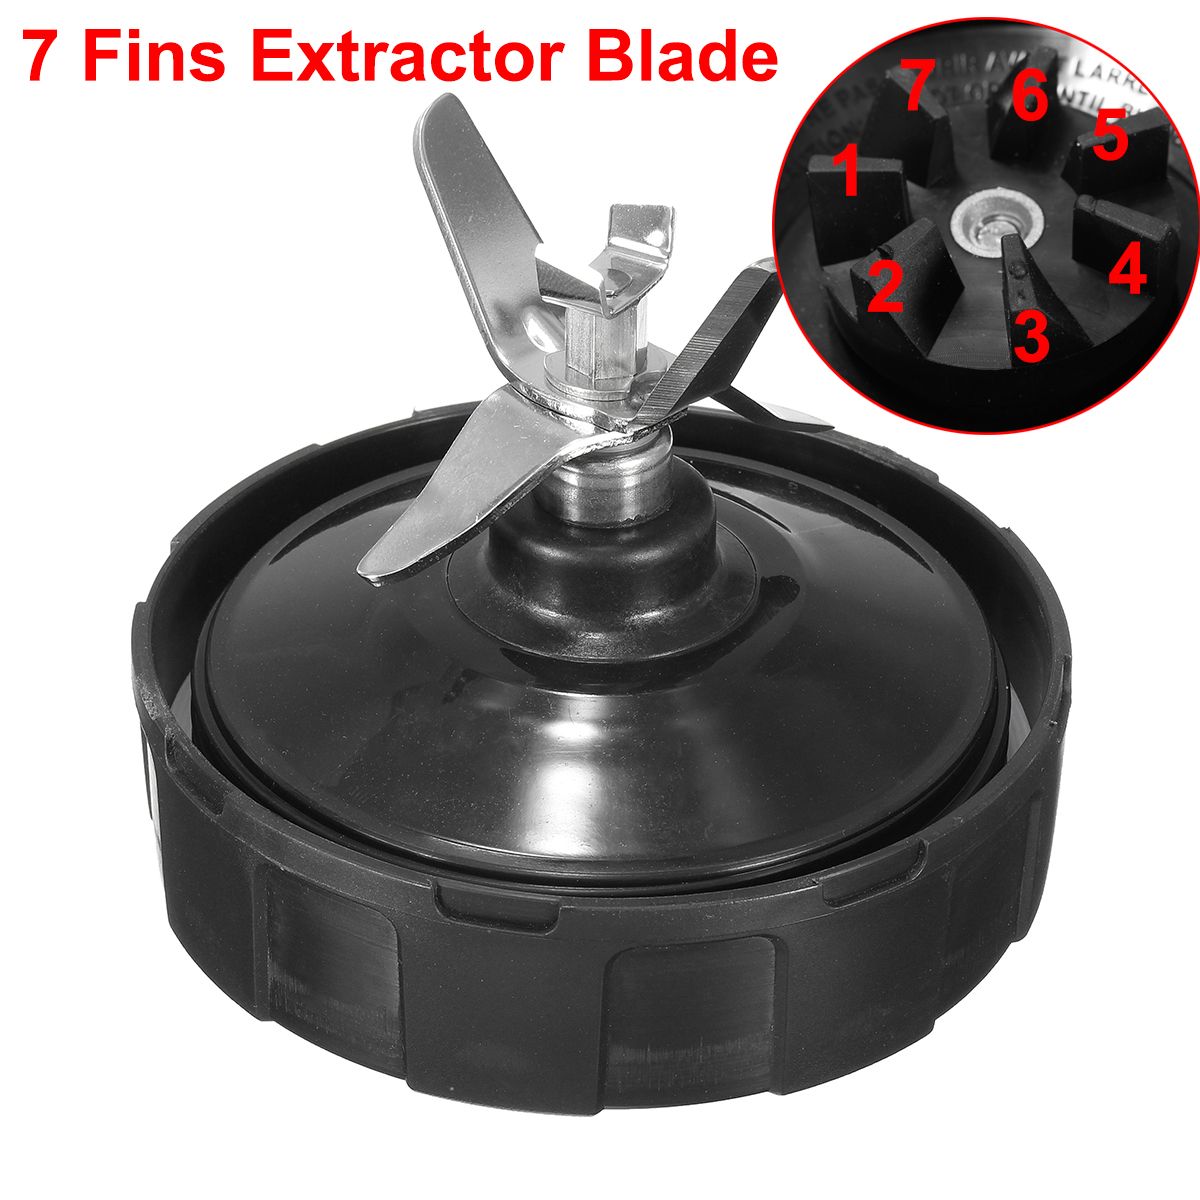 7-Fins-Blender-Extractor-Blade-Assembly-Replacement-For-Nutri-Ninja-BL487-BL488W-BL490-BL492-BL492W-1167549